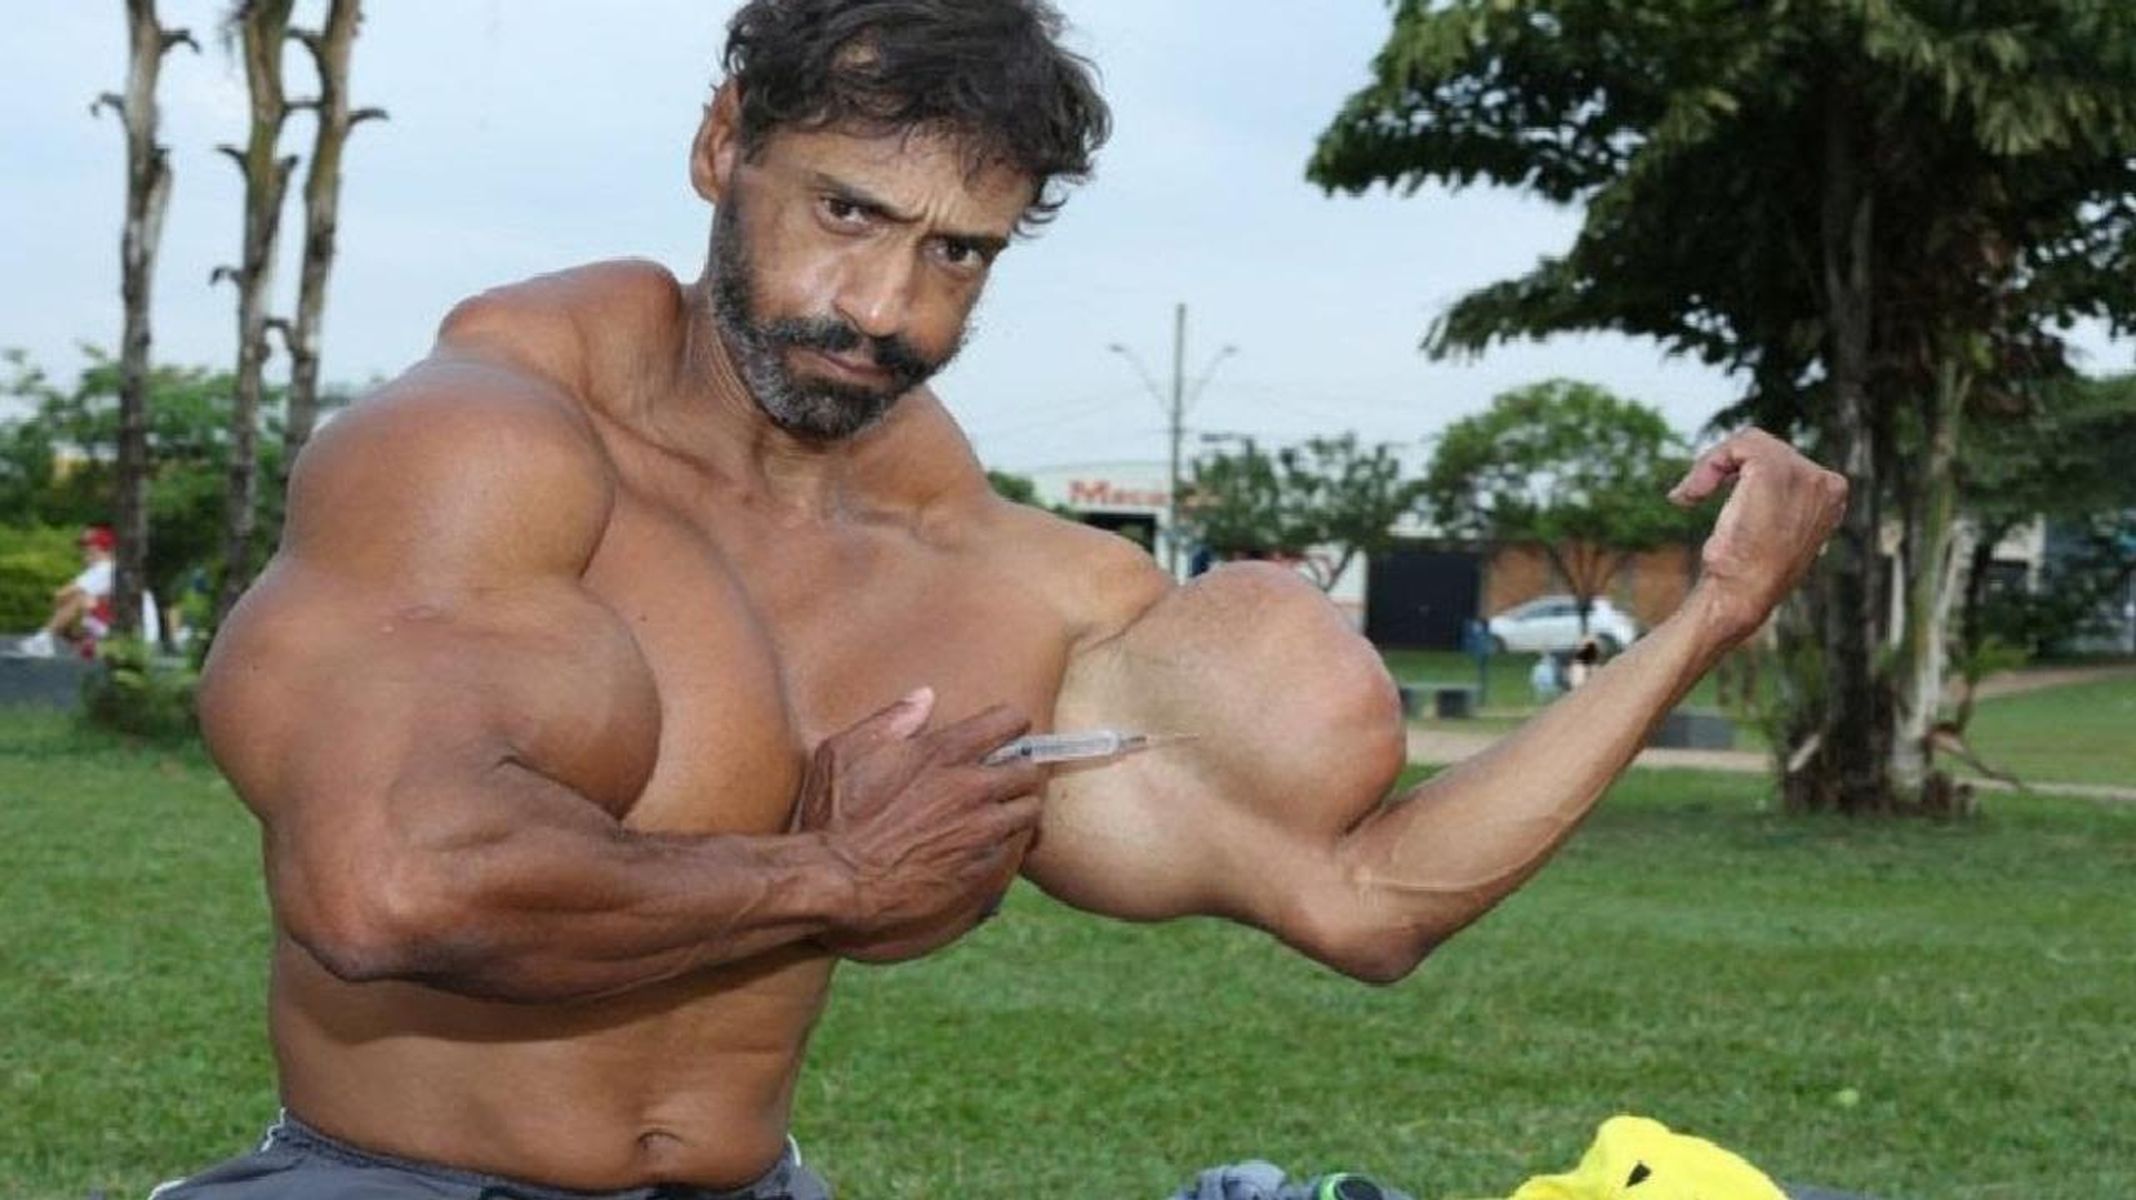 What Is Synthol, What Are Its Harms, What Is Synthol Good For, Is It Legal To Use Synthol?